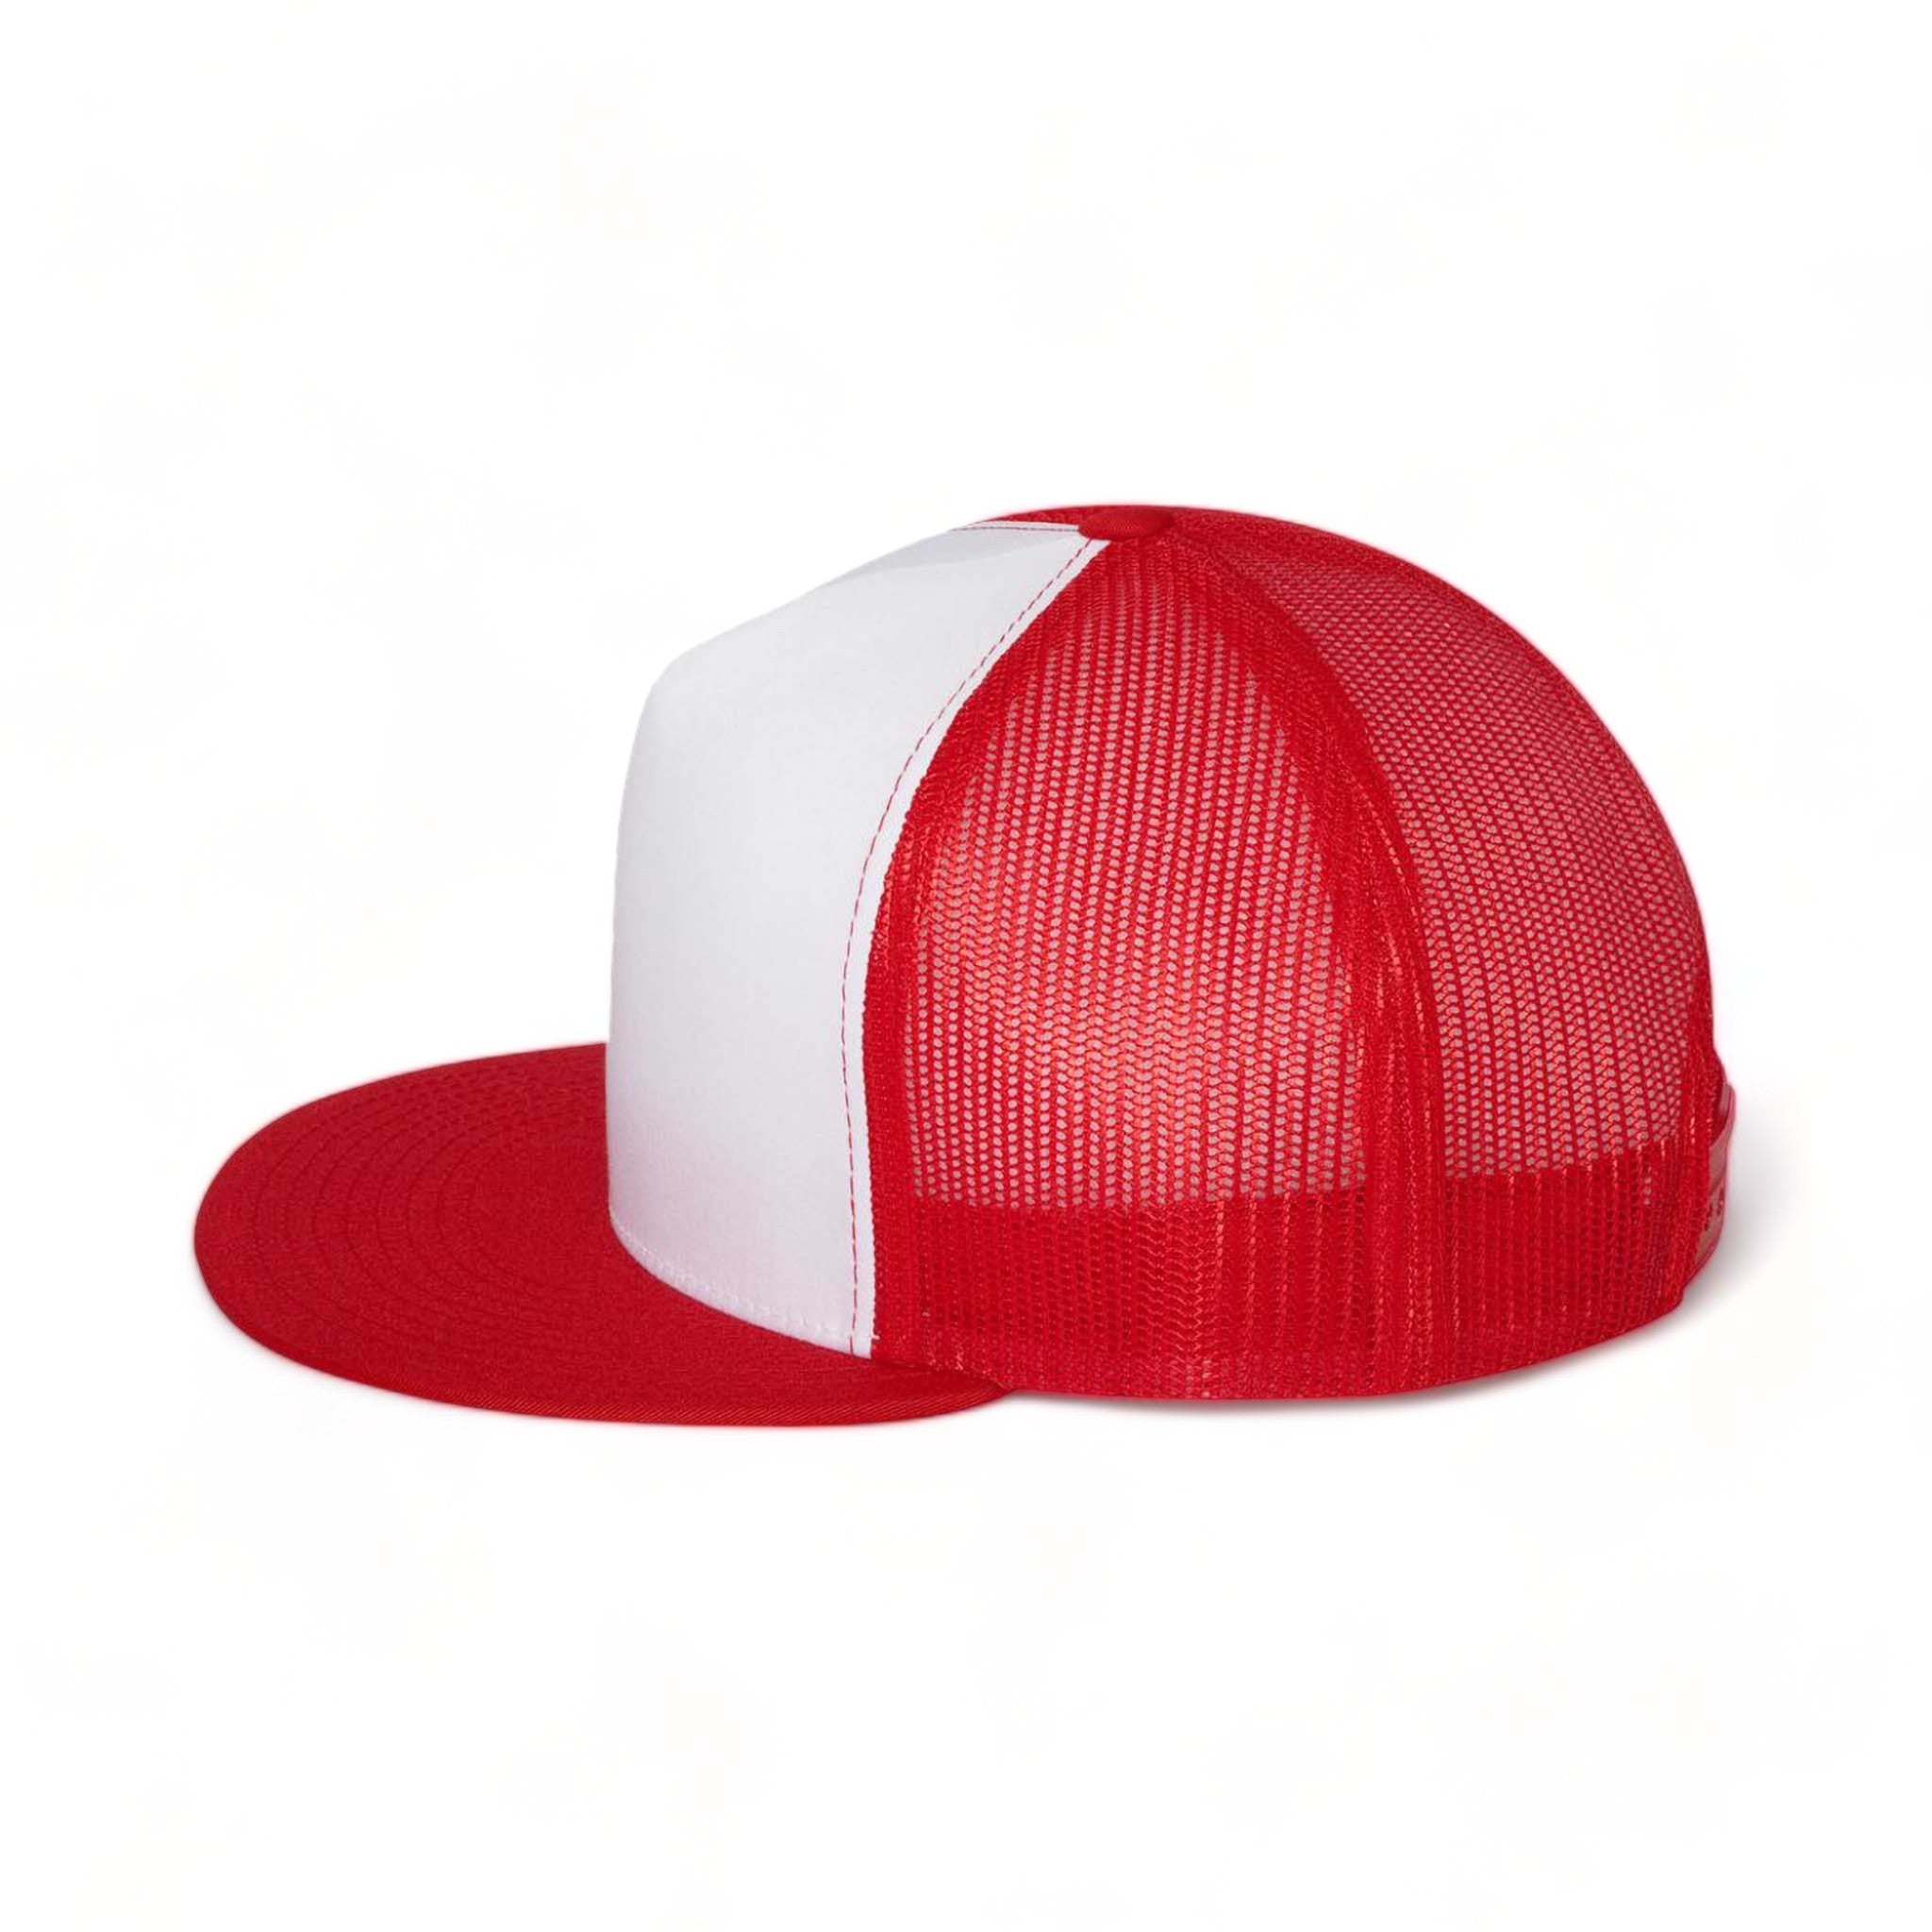 Side view of YP Classics 6006 custom hat in red, white and red